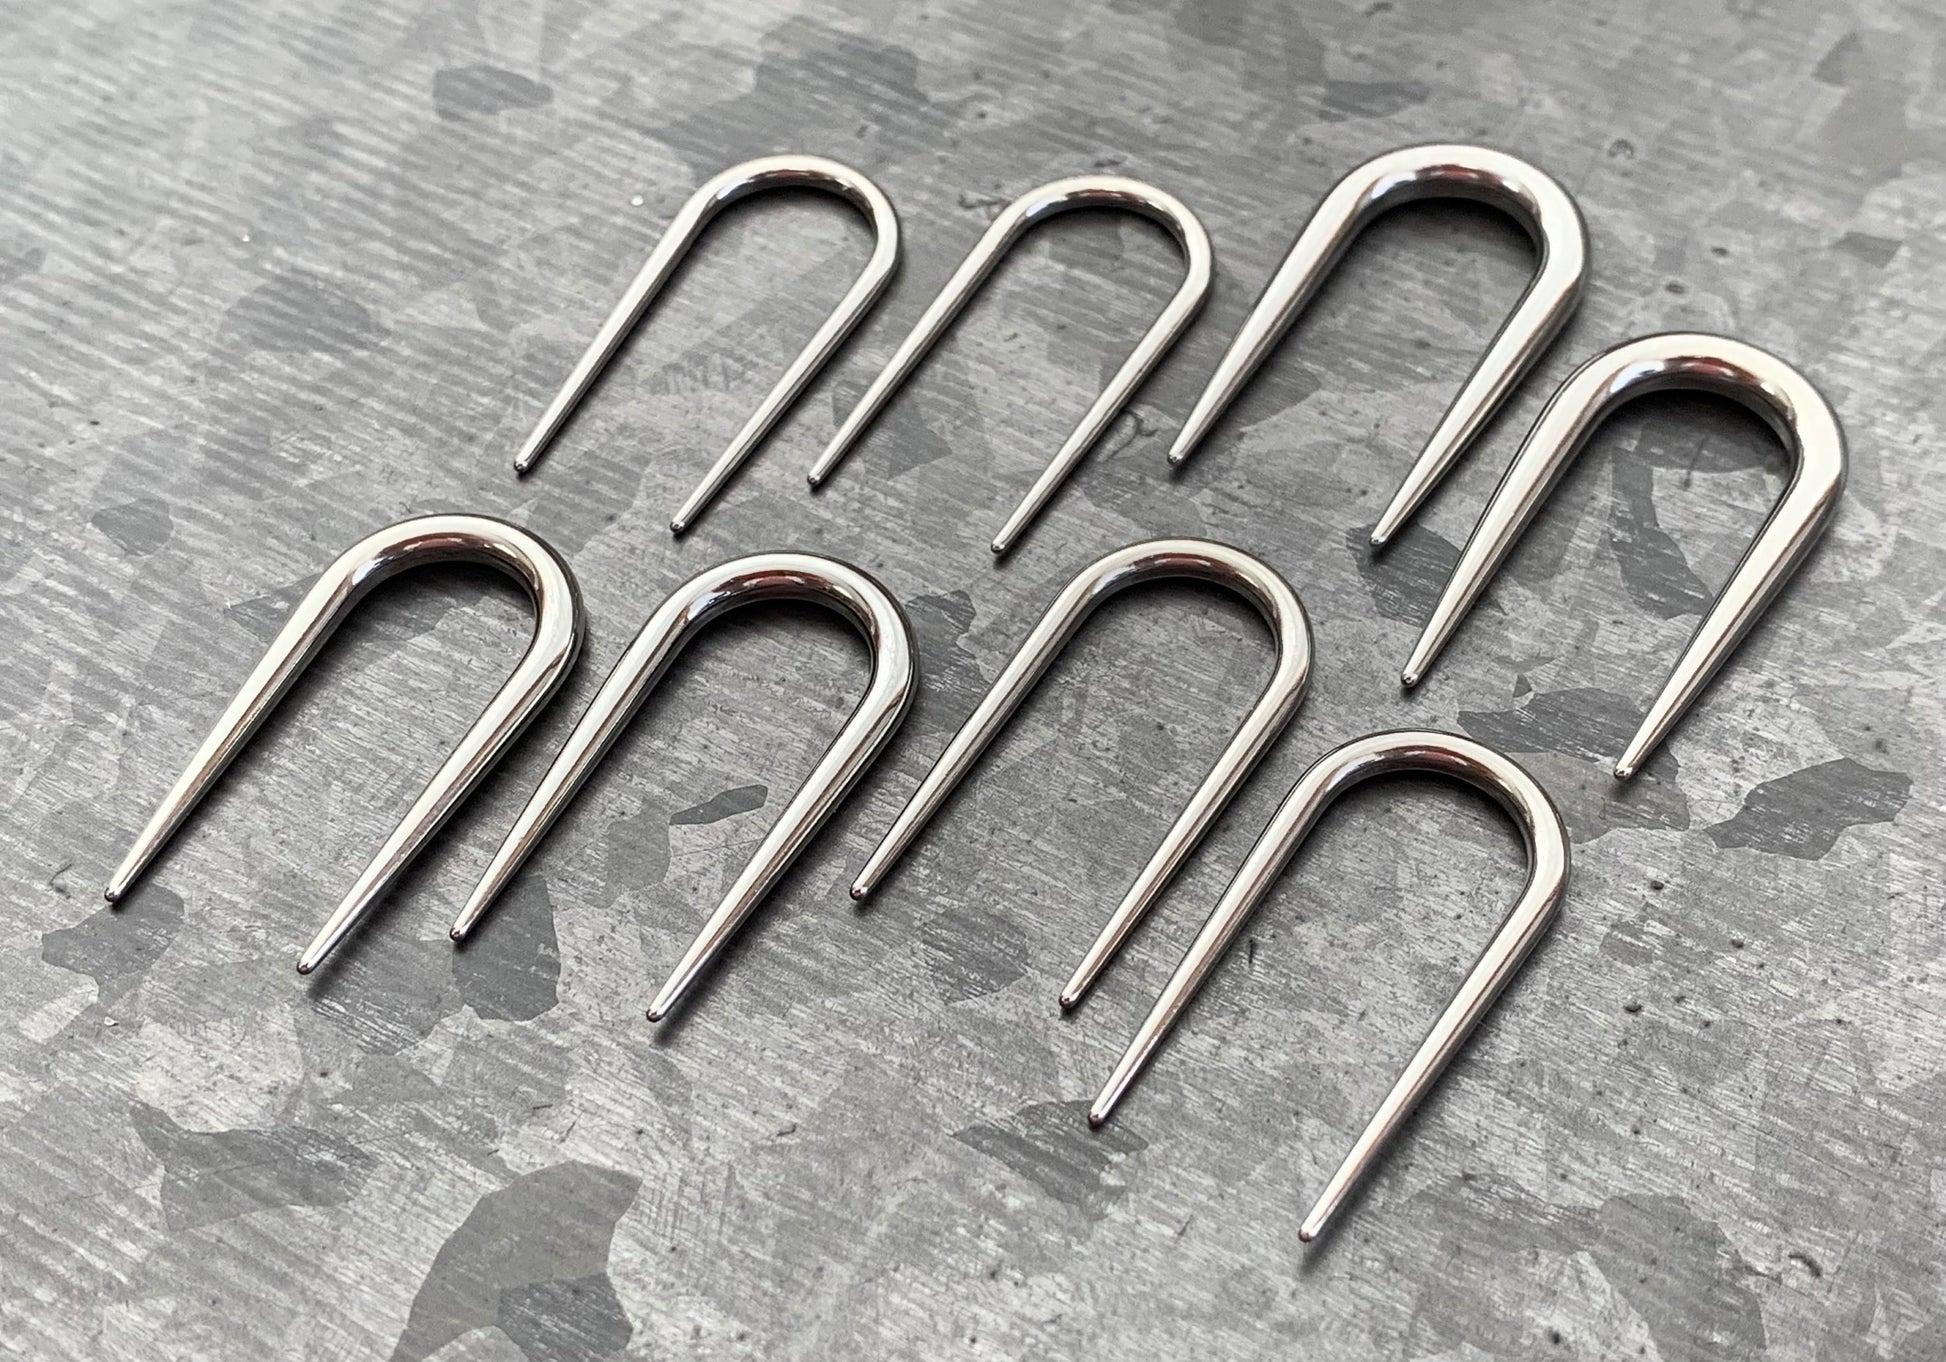 PAIR of Unique Surgical Steel U-Shaped Tapers Plugs - Gauges 14g (1.6mm) thru 10g (2.5mm) available!